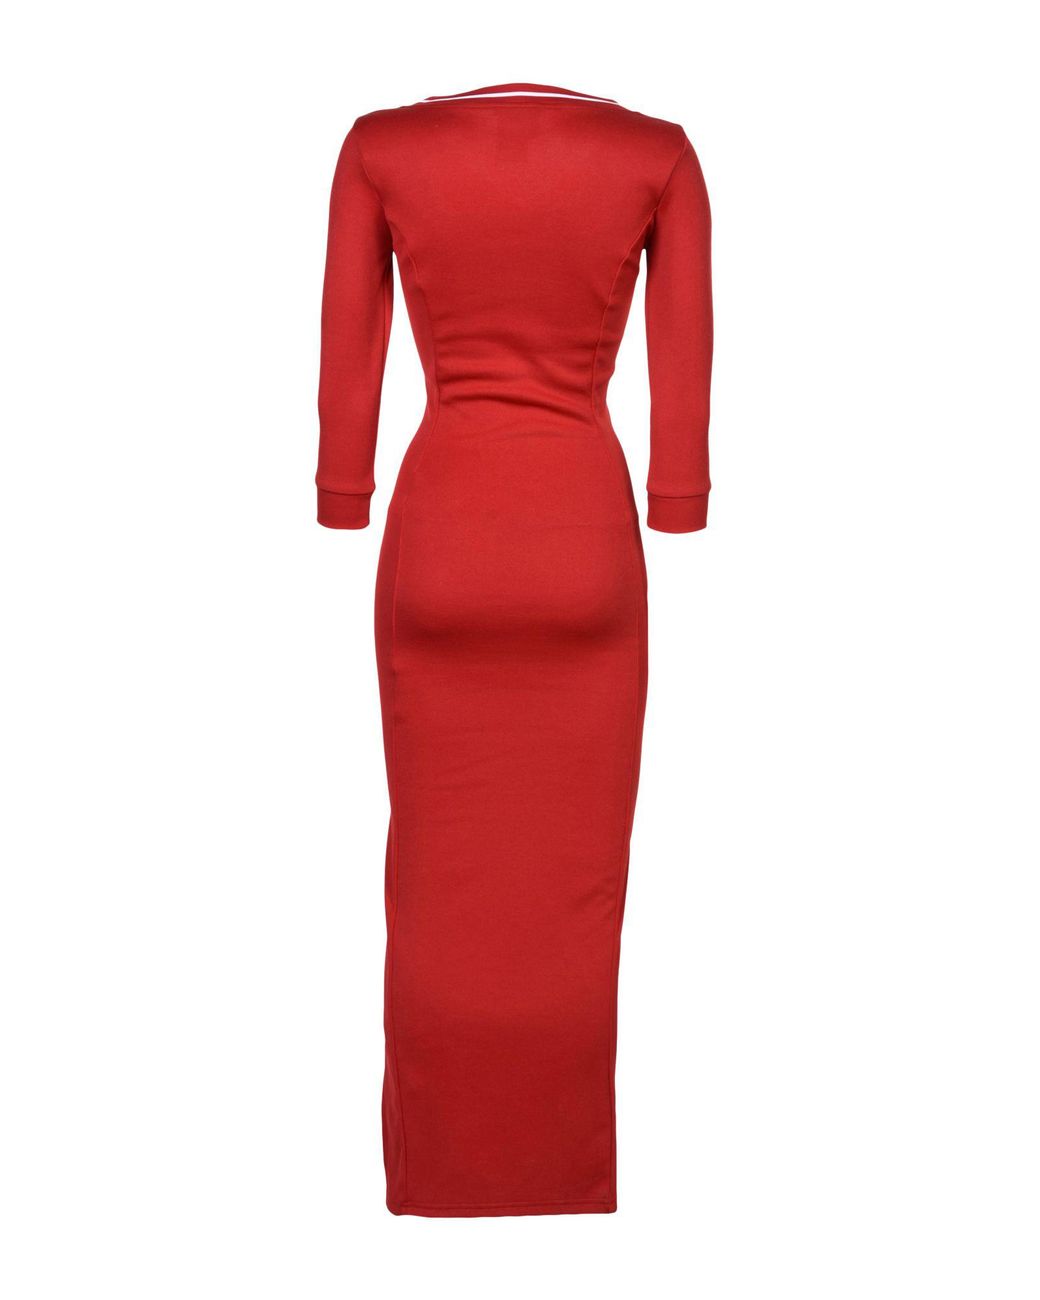 Jeremy Scott for adidas Synthetic Long Dress in Red | Lyst